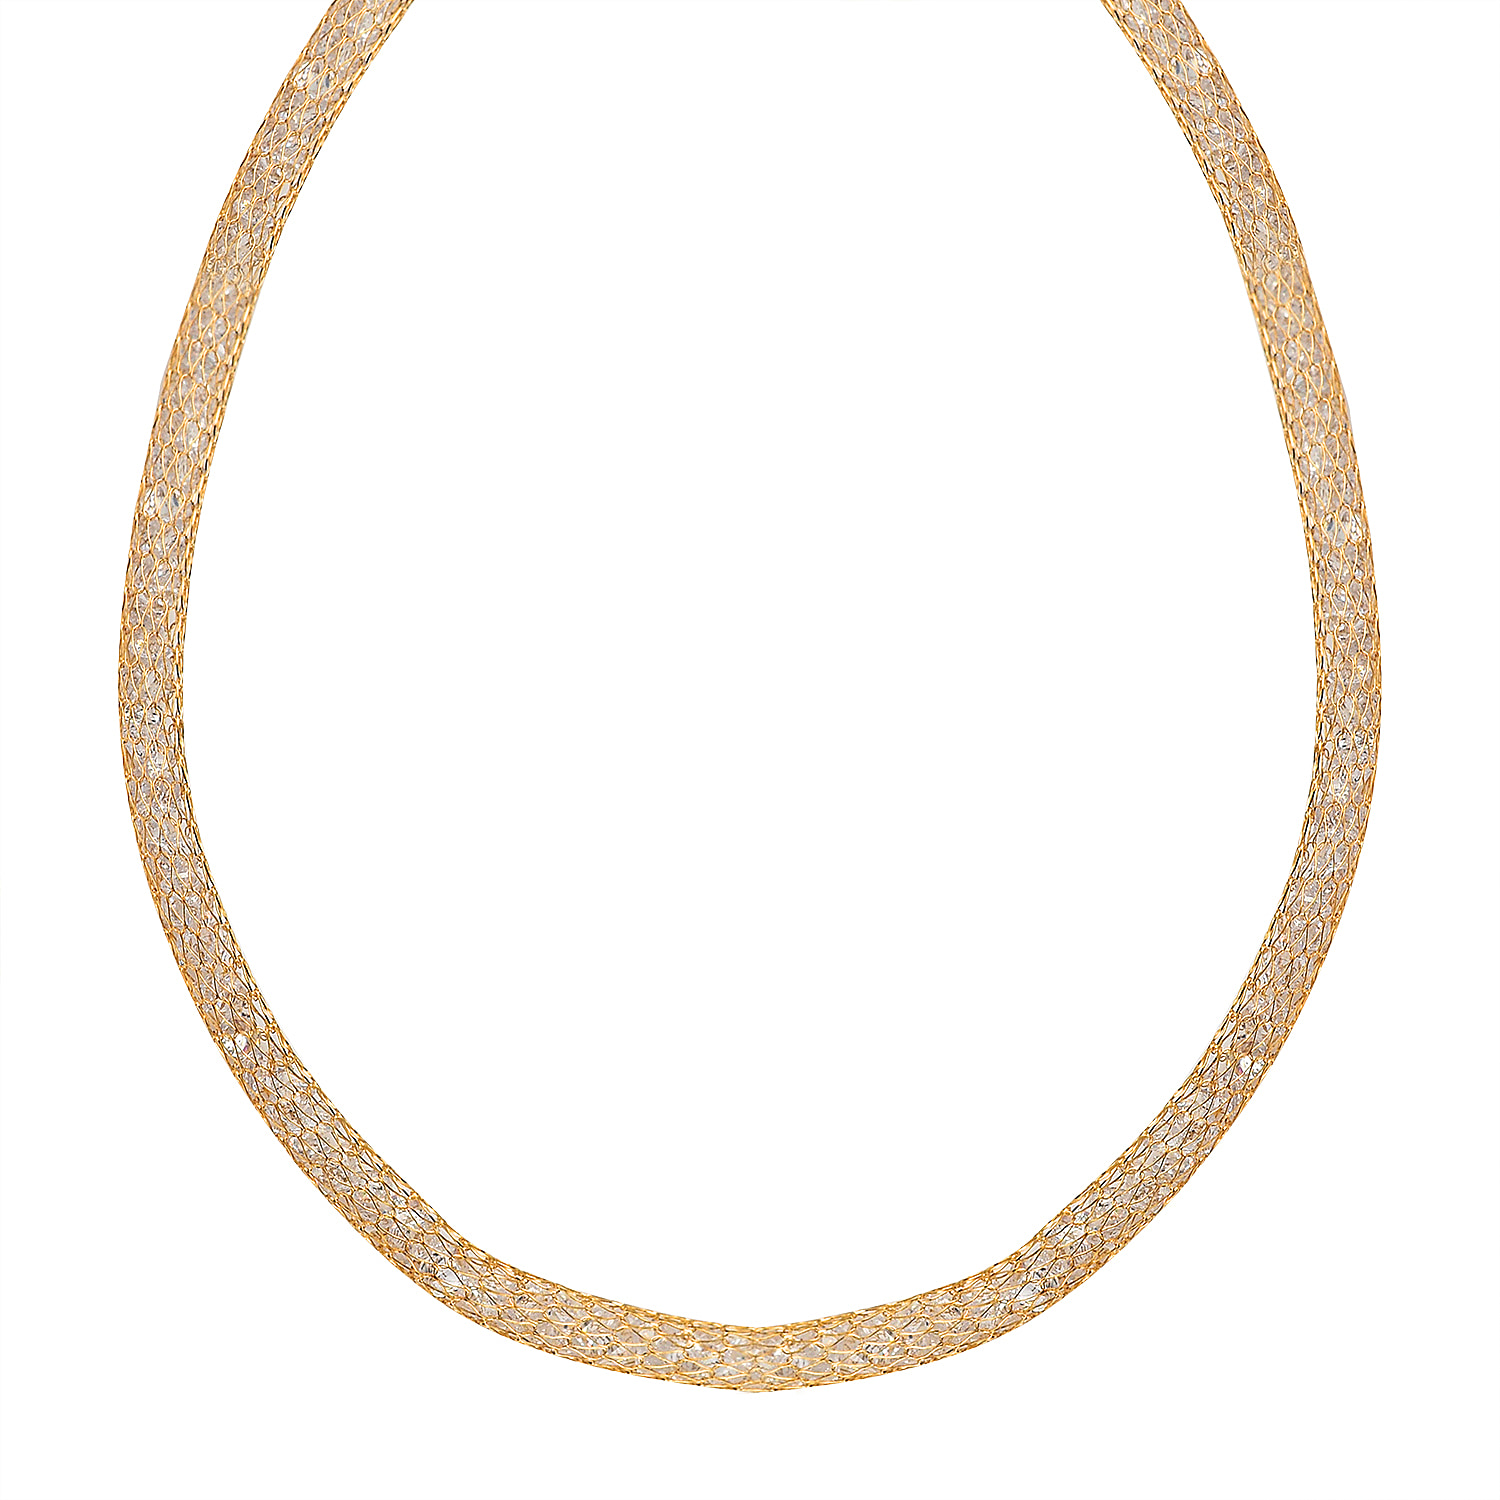 Maestro Collection - 9K Yellow Gold Cubic Zirconia Crochet Necklace (Size - 20)